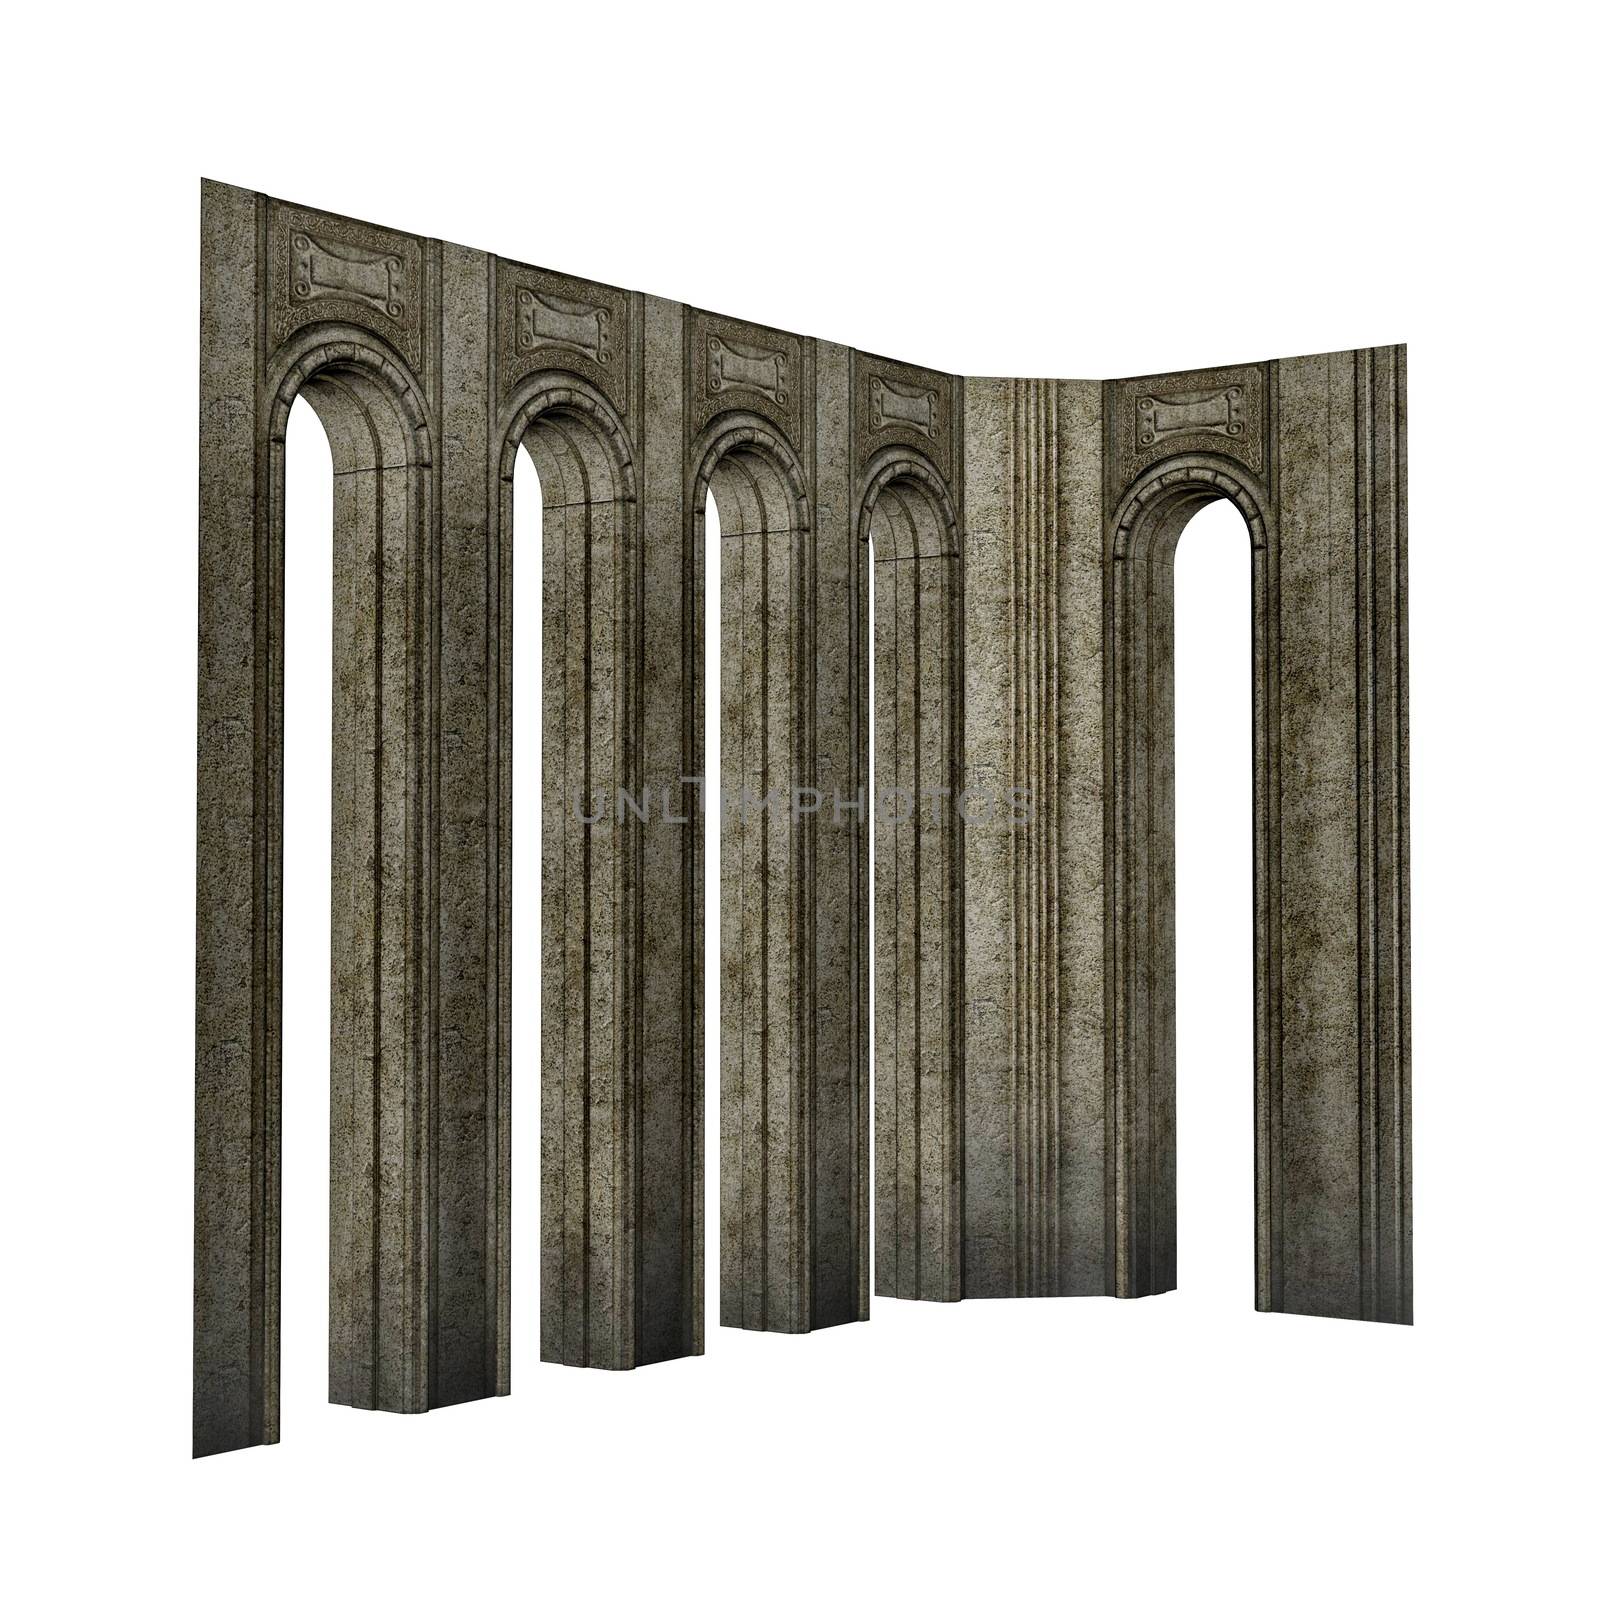 Arch pillars isolated in white background - 3D render